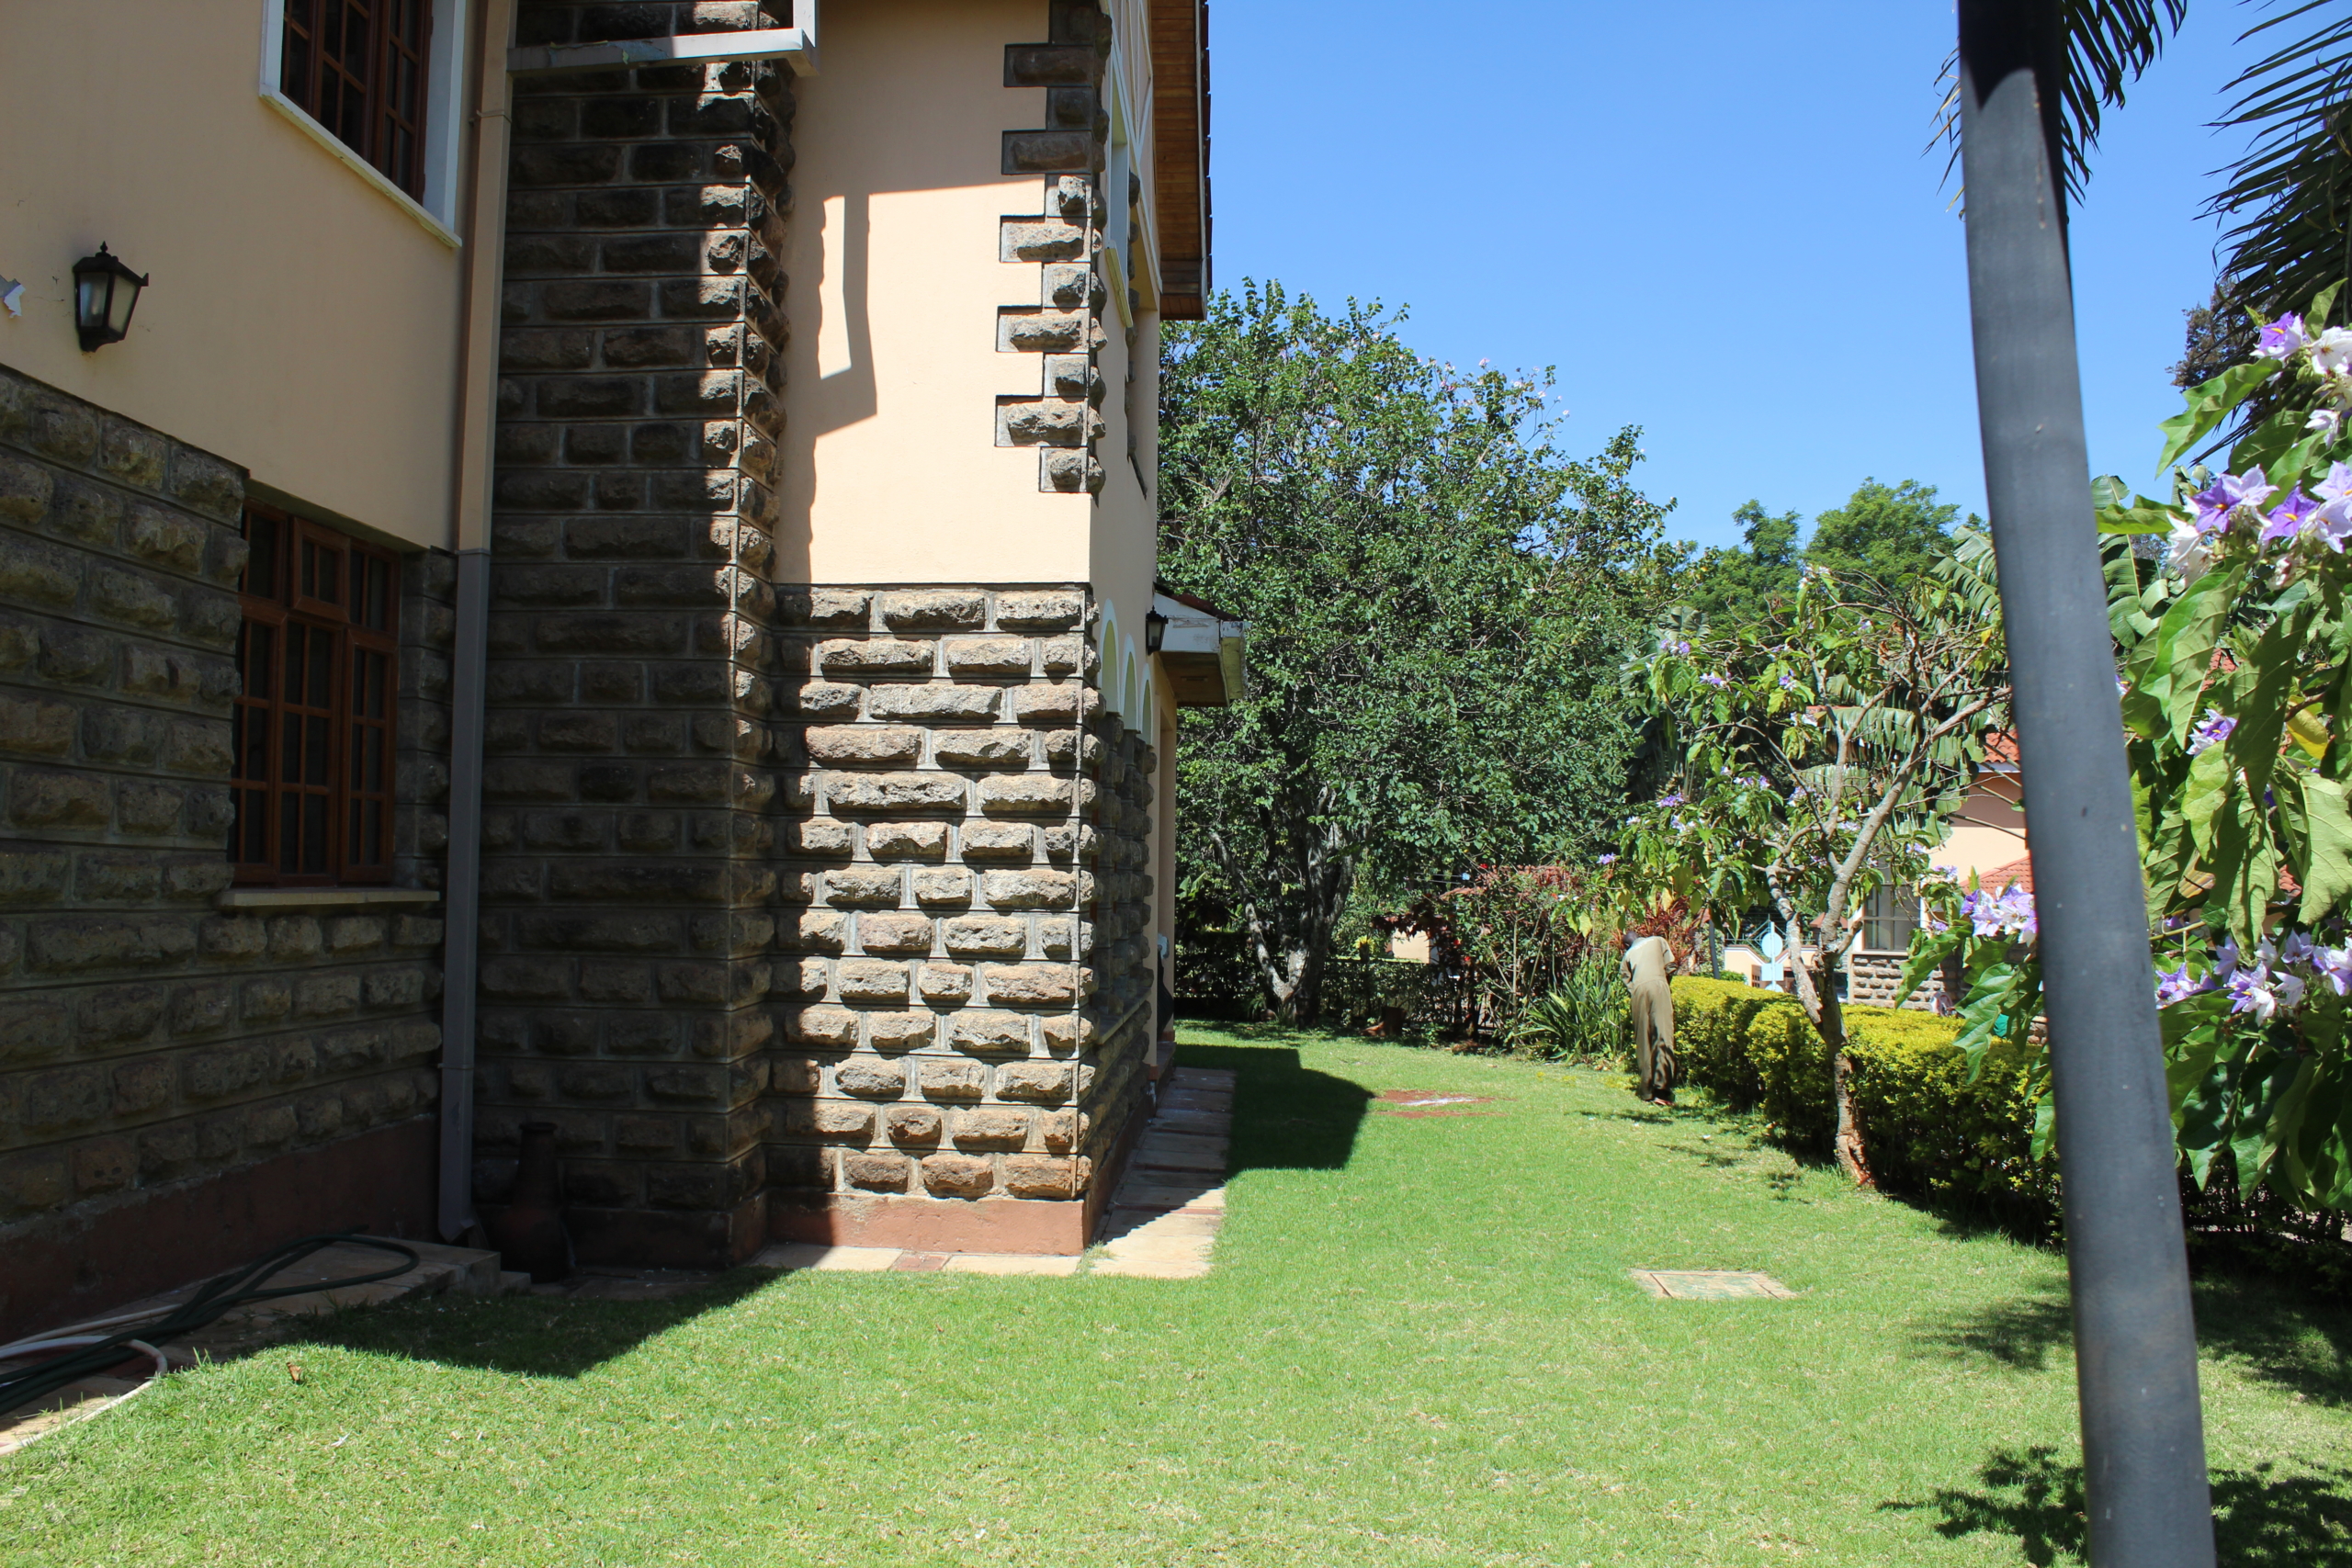 Townhouse to Let Lavington Garden and Lawn